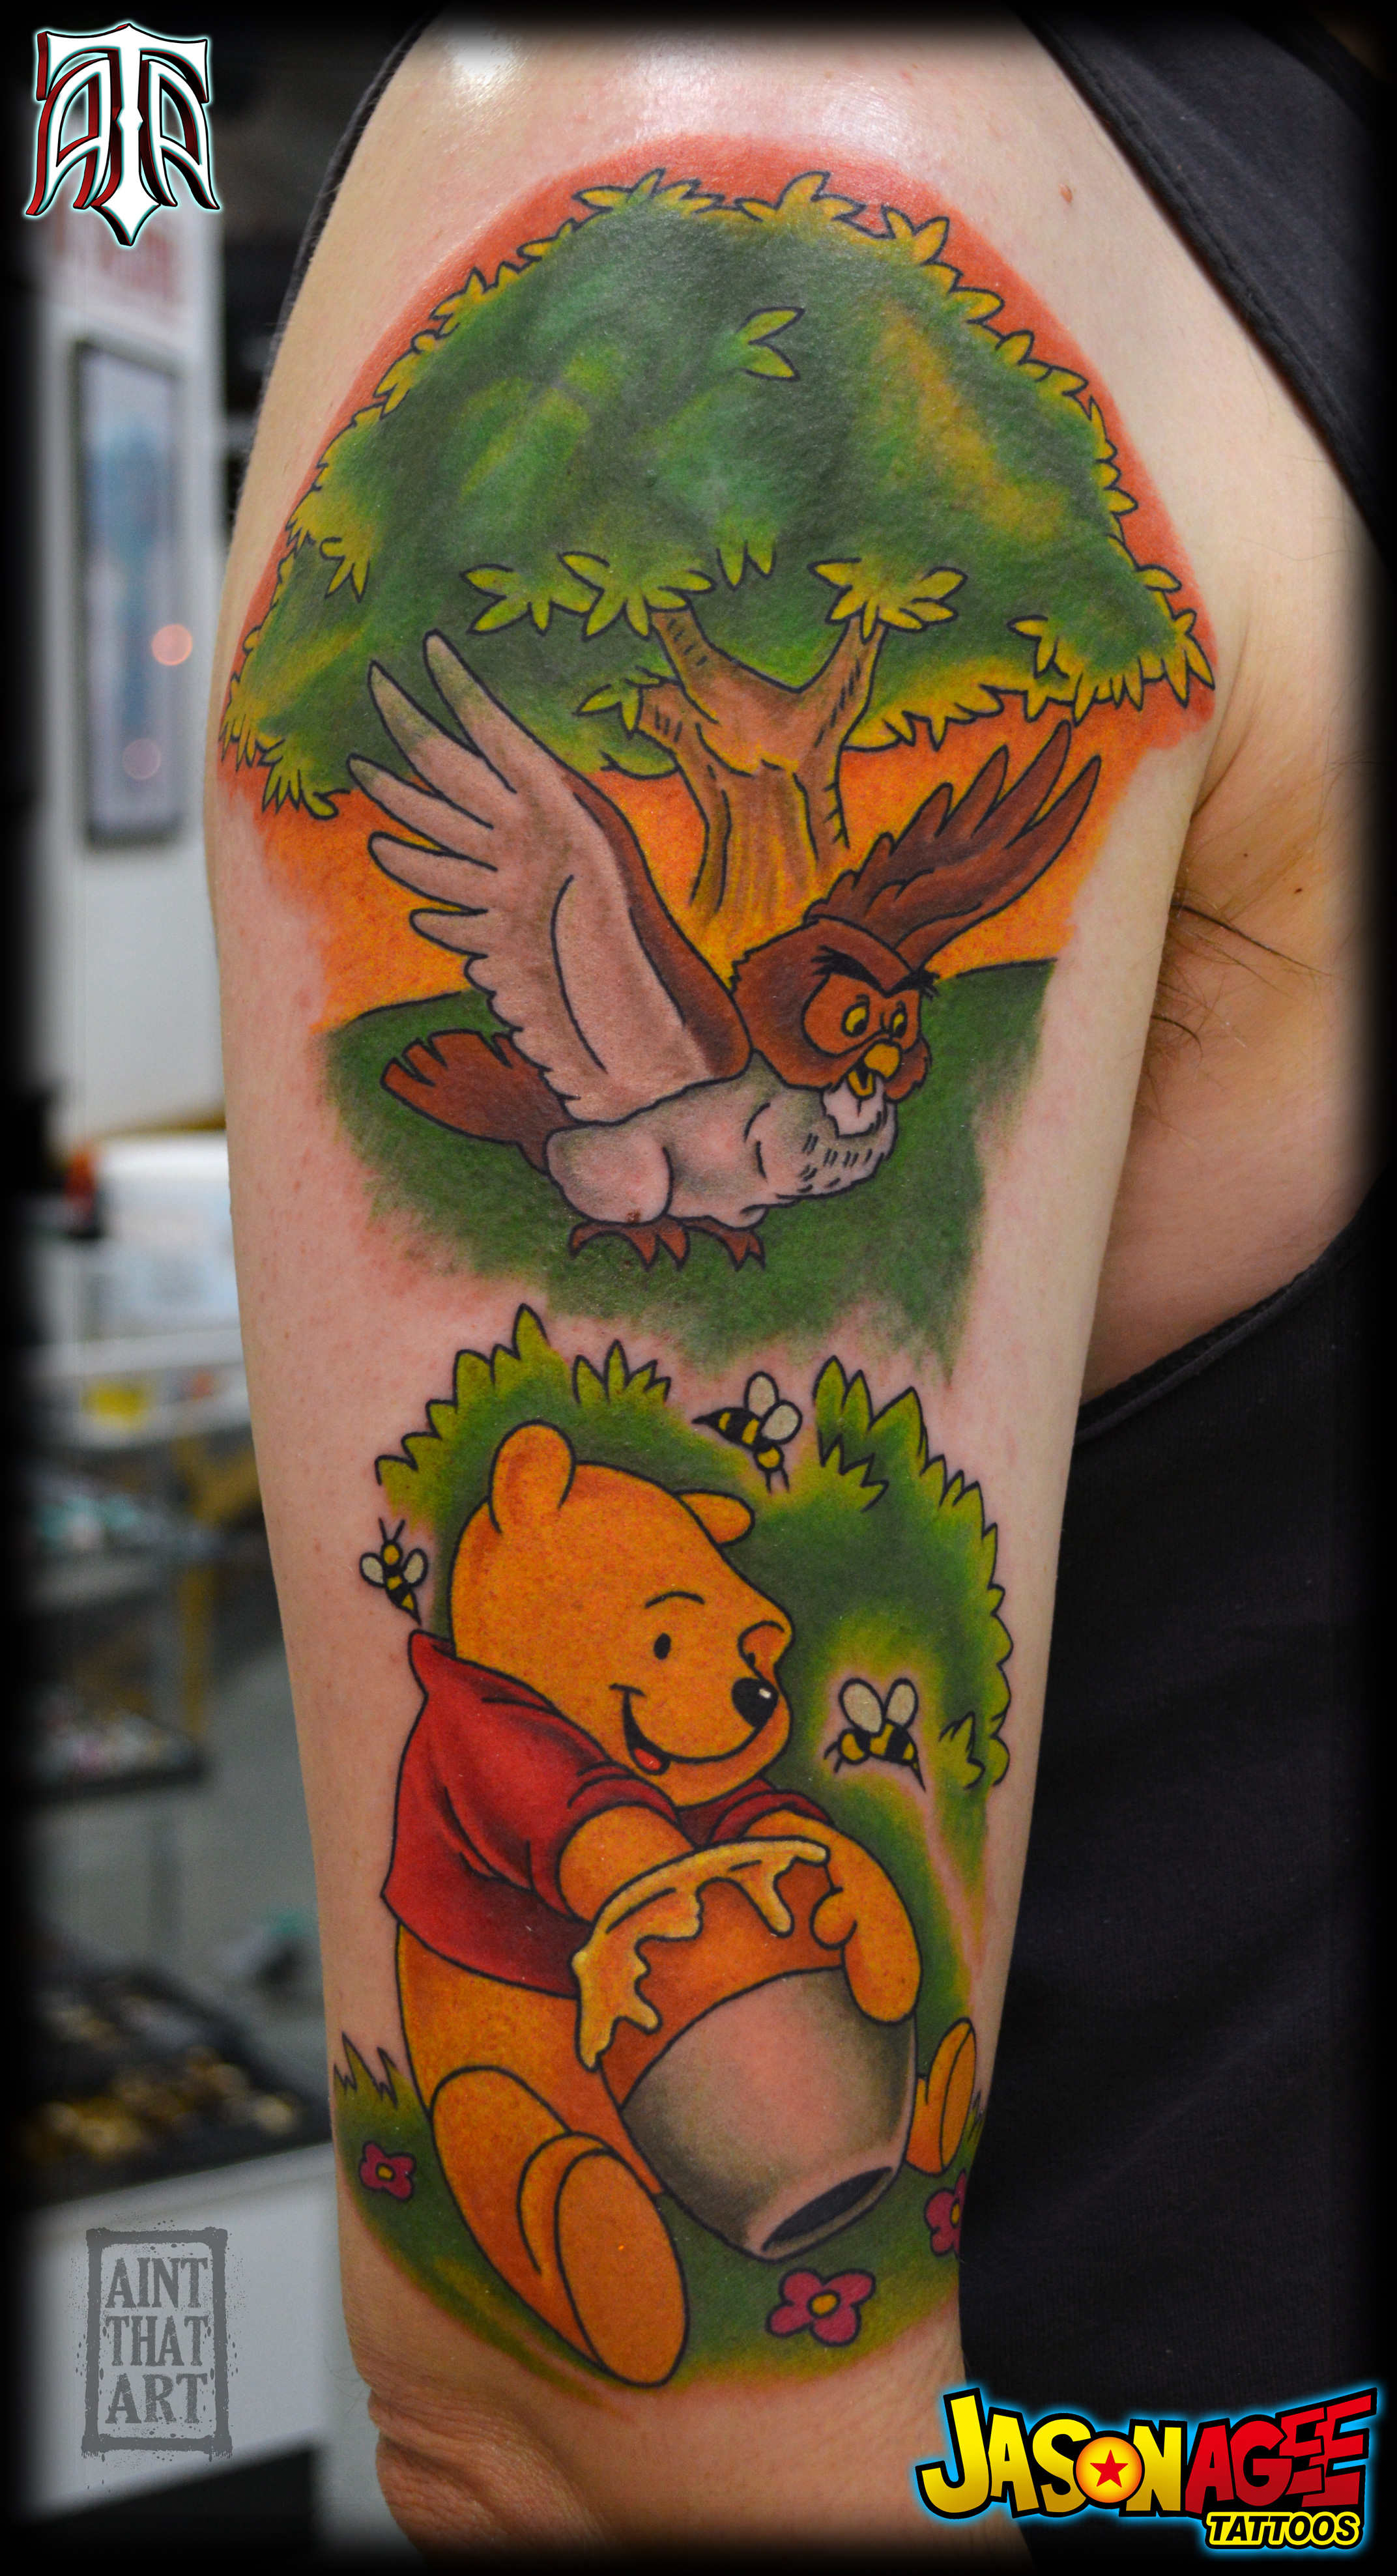 Tattoo tagged with healed winnie the pooh small bear fictional  character animal disney facebook twitter pooh bear inner forearm  barisyesilbas other disney character film and book sketch work cartoon  character  inkedappcom